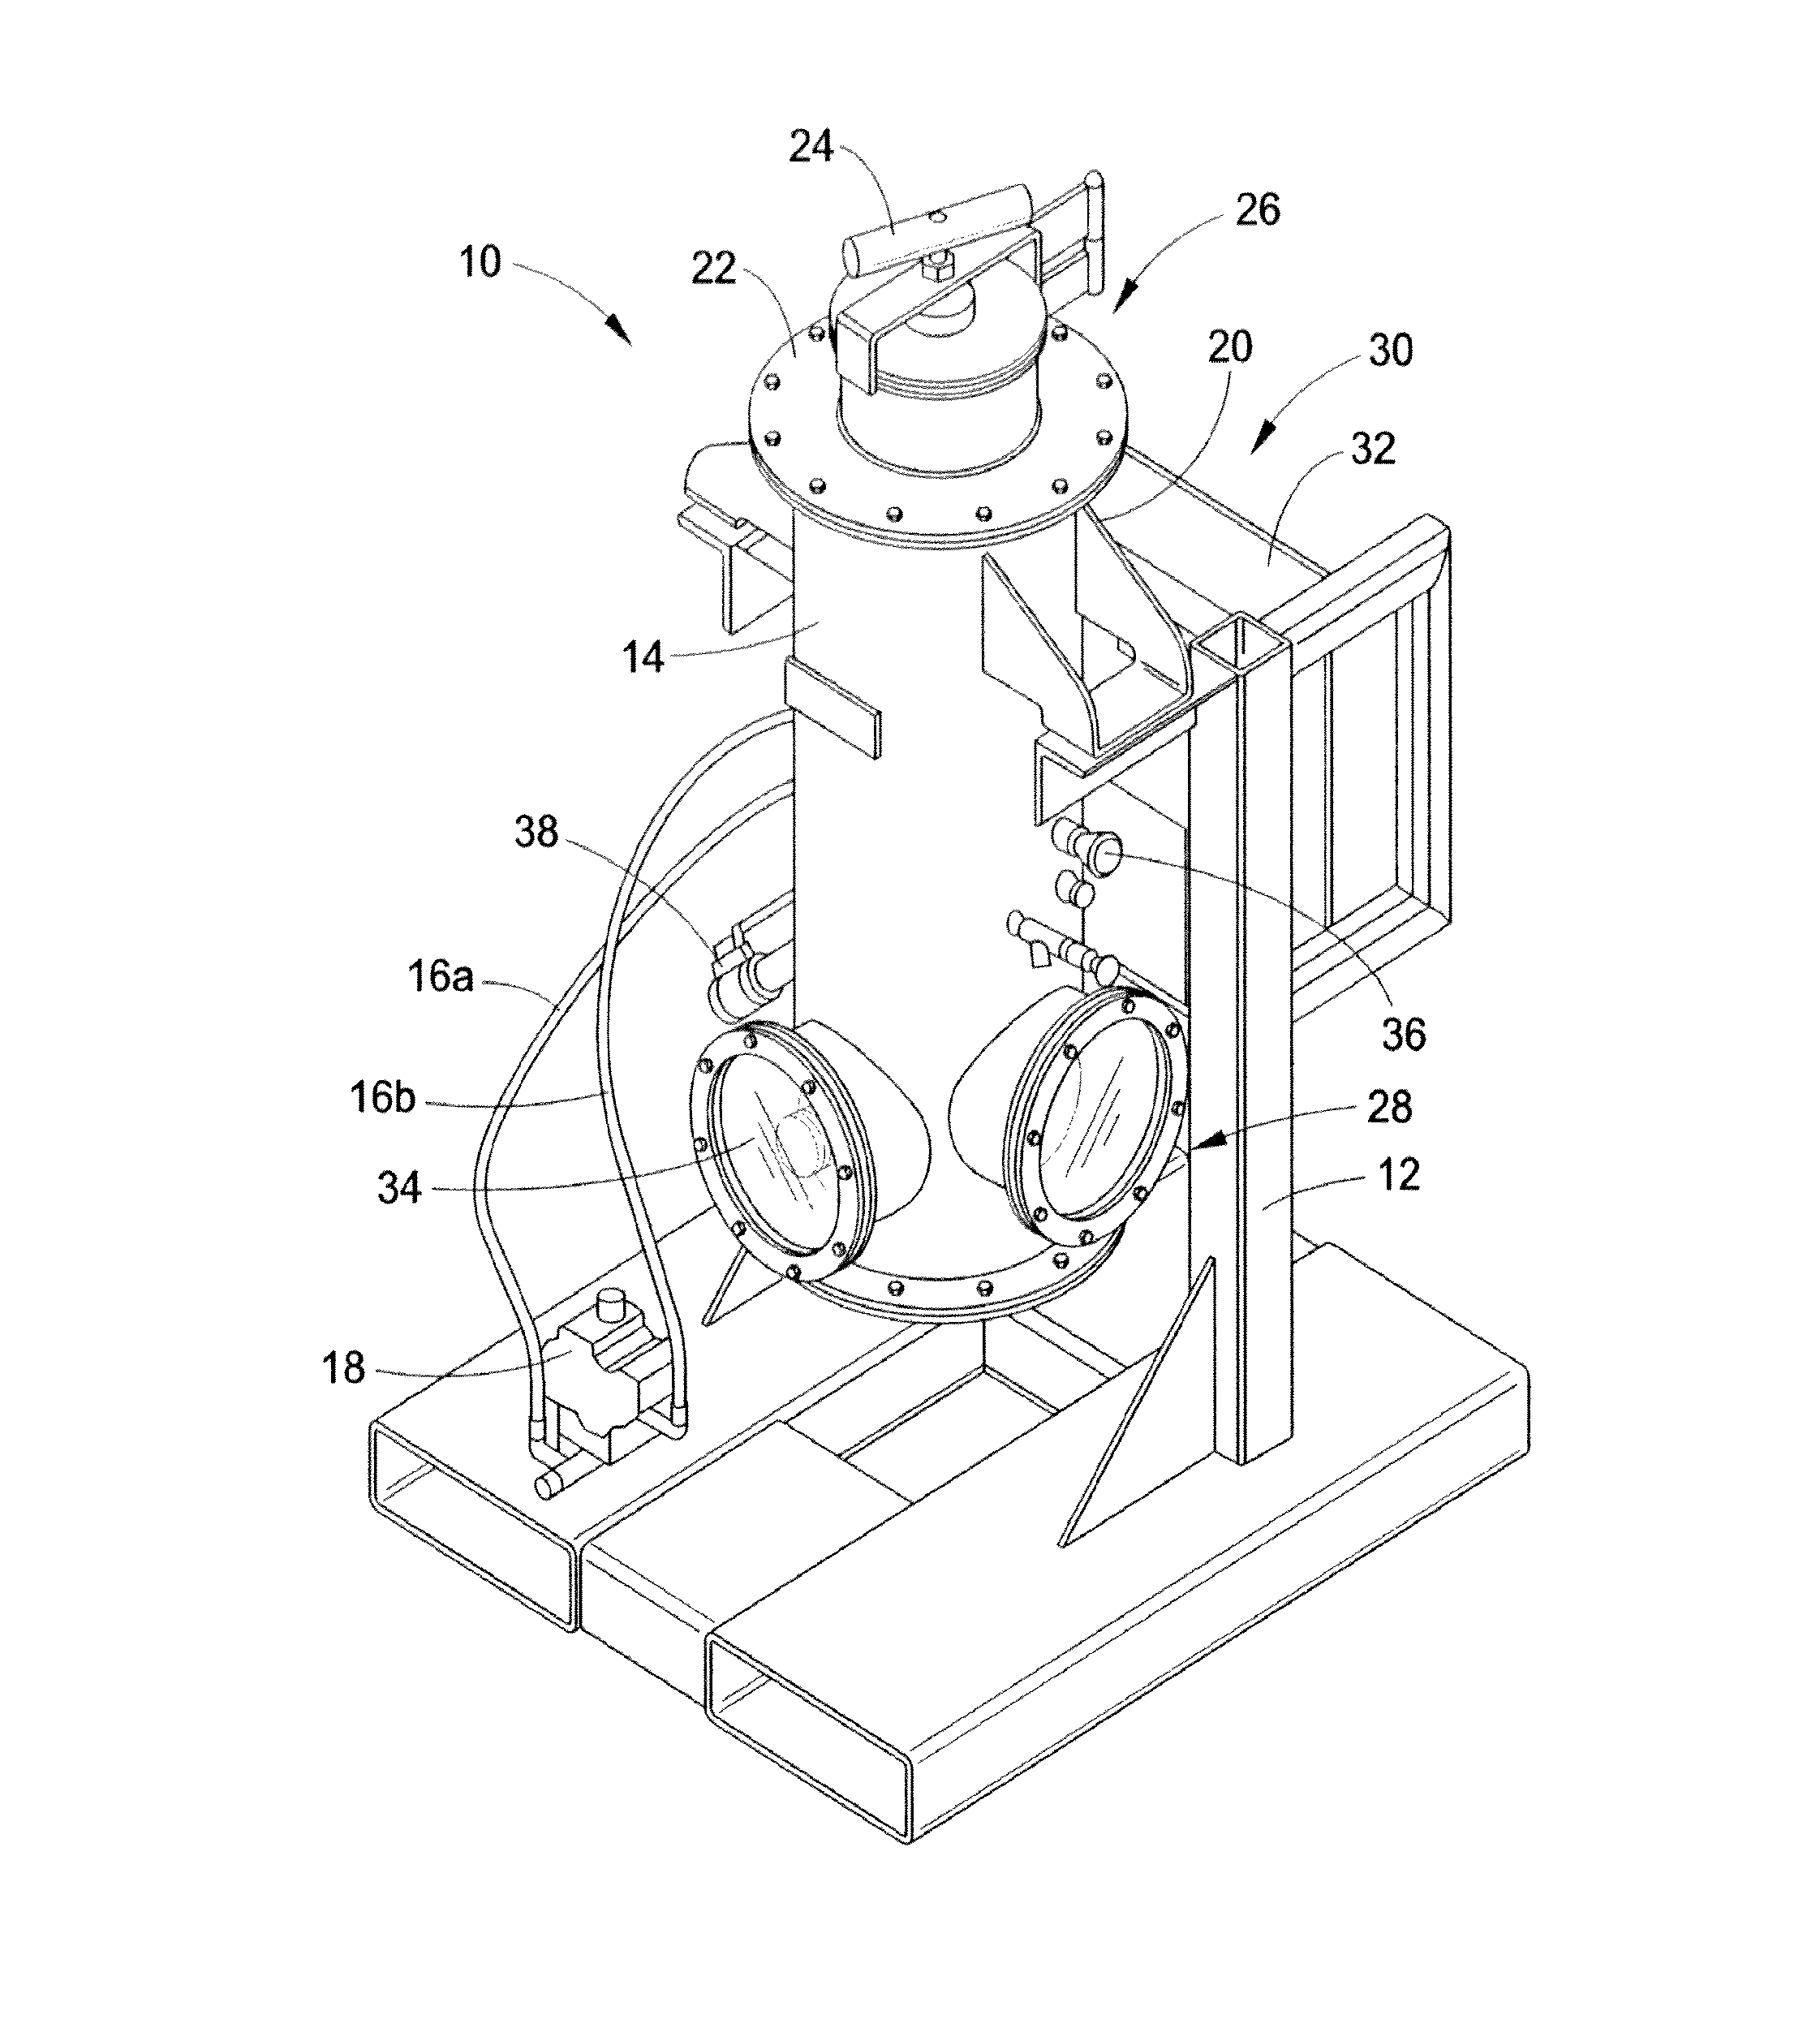 Flux injection assembly and method